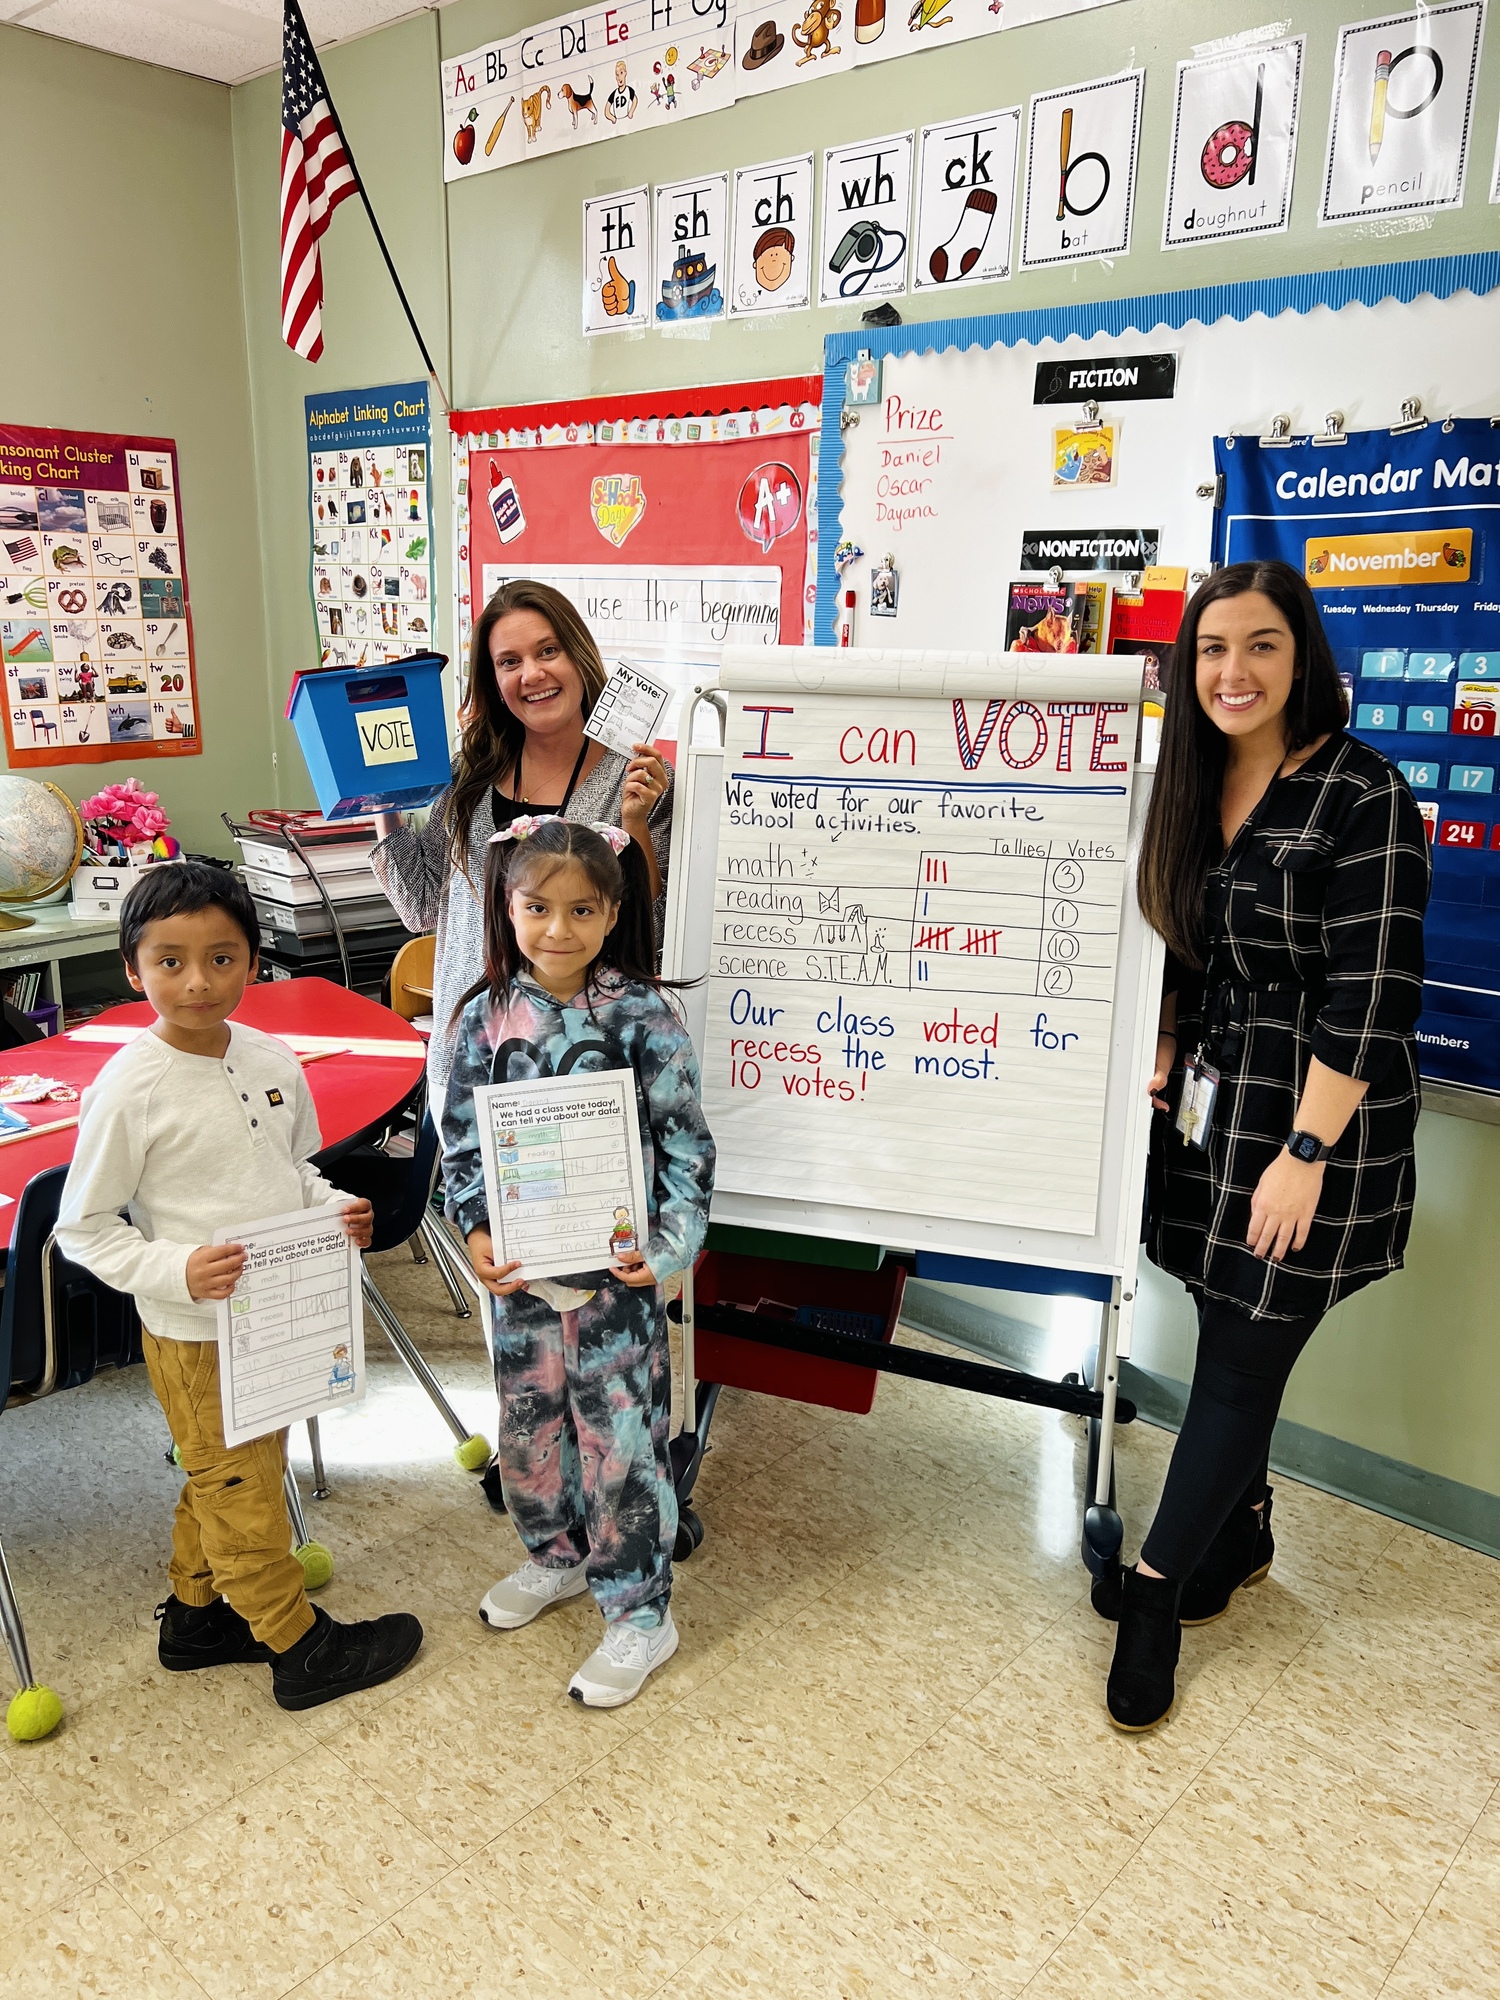 Hampton Bays Elementary School second grade students in Liz Scott's and Krista Savino's class recently learned about Election Day and what it means to vote. The students were given ballots to cast a vote on their favorite school activity. They learned that voting can be anonymous, and they don't need to share their answers. After the votes were tallied, it became clear that recess was the winner of their favorite activities.  COURTESY HAMPTON BAYS SCHOOL DISTRICT